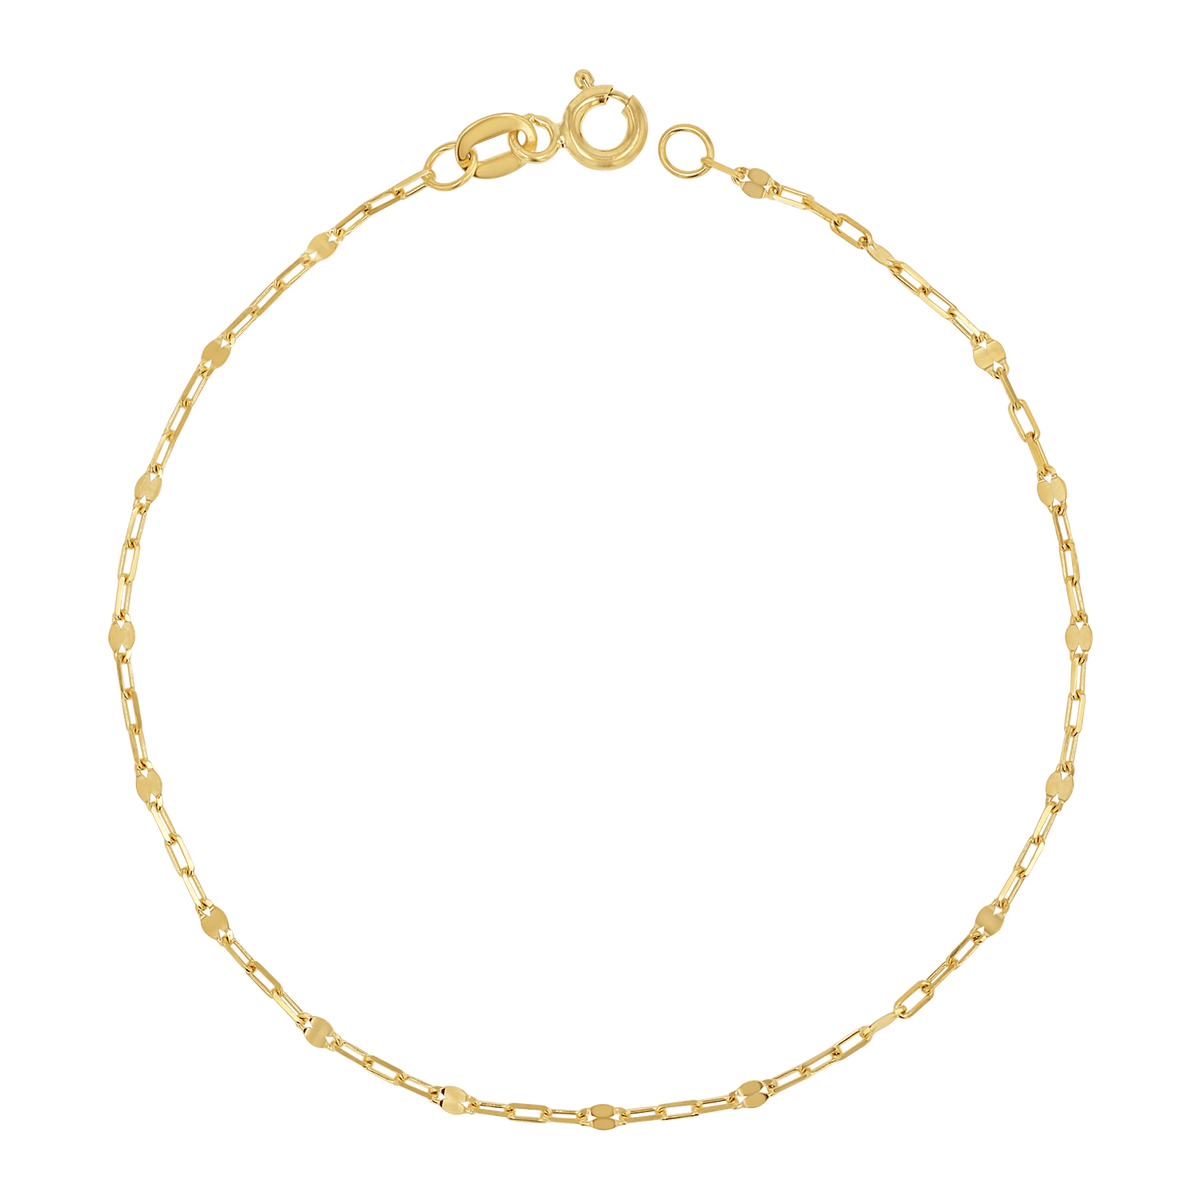 Sequin Bracelet Chain Petit (C-PLD) / 6.5 Inches by Baby Gold - Shop Custom Gold Jewelry